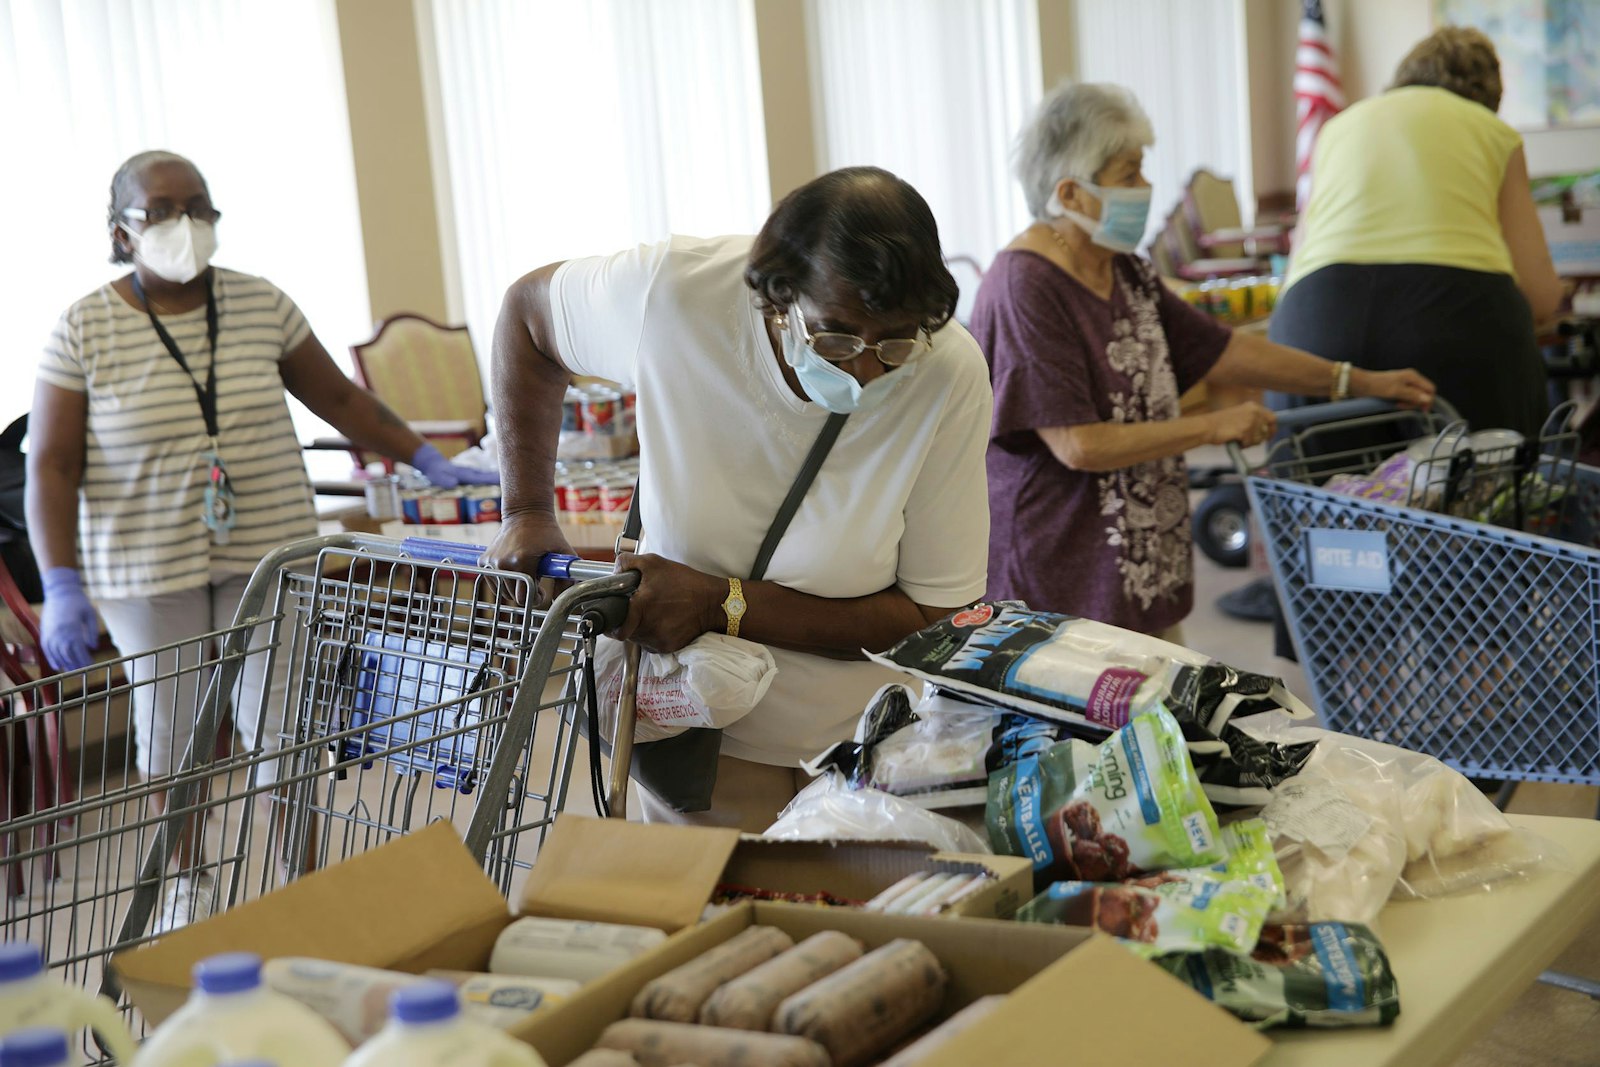 Seniors who have difficulty securing transportation to the grocery store or don't have someone who can pickup groceries for them can sign up with Catholic Charities' Senior Outreach Program to have food brought to them or have a "pop-up pantry" set up in their living complex.